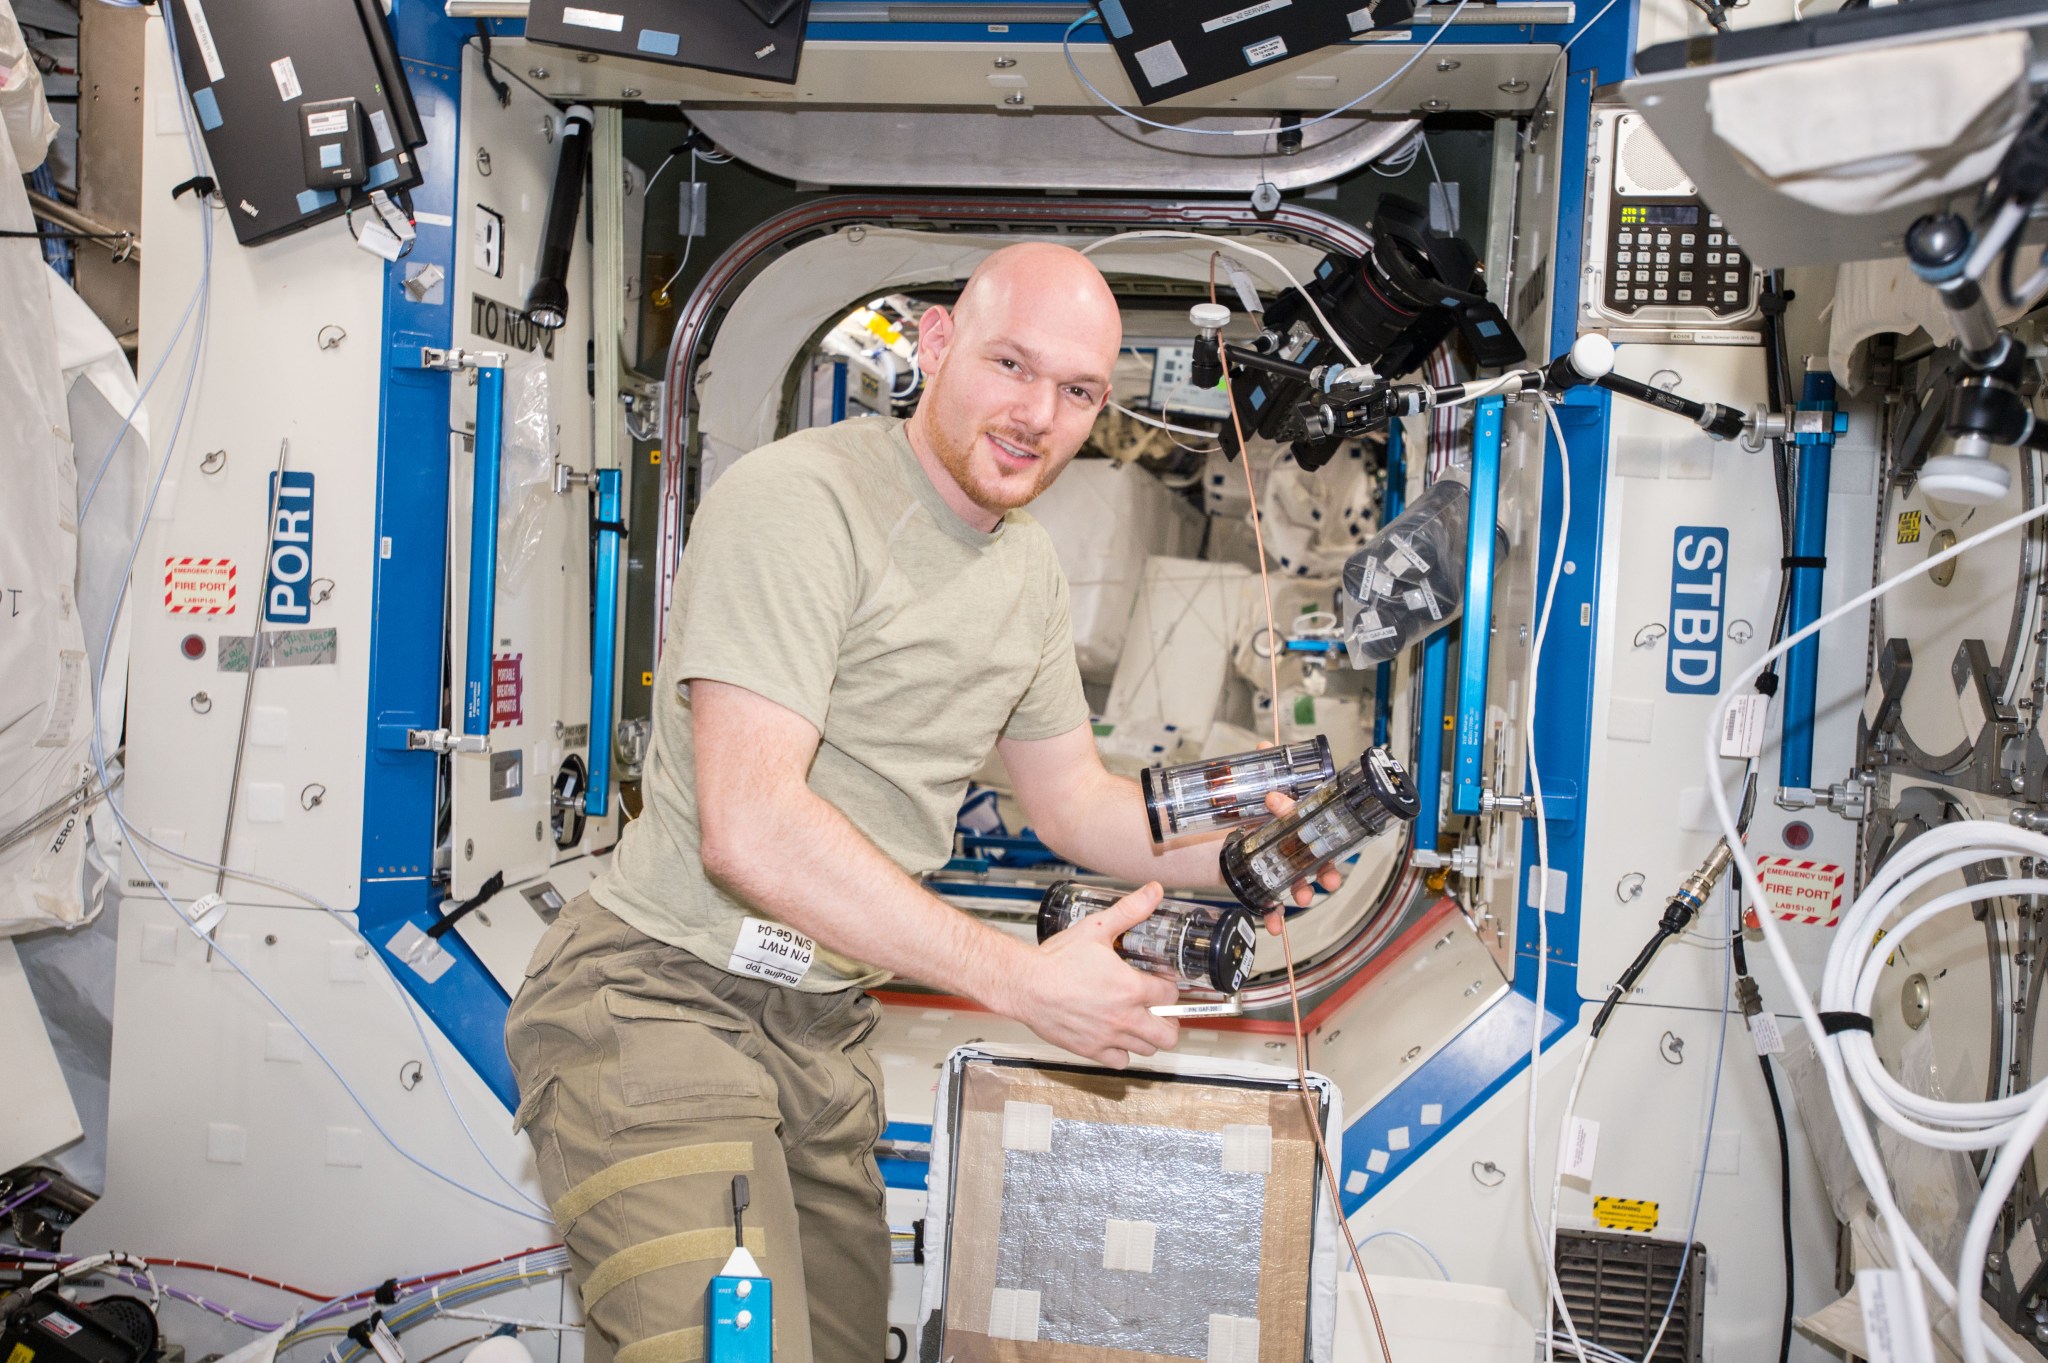 Alexander Gerst of the European Space Agency (ESA) works with the Micro 8 experiment in the U.S. National Laboratory during Expe